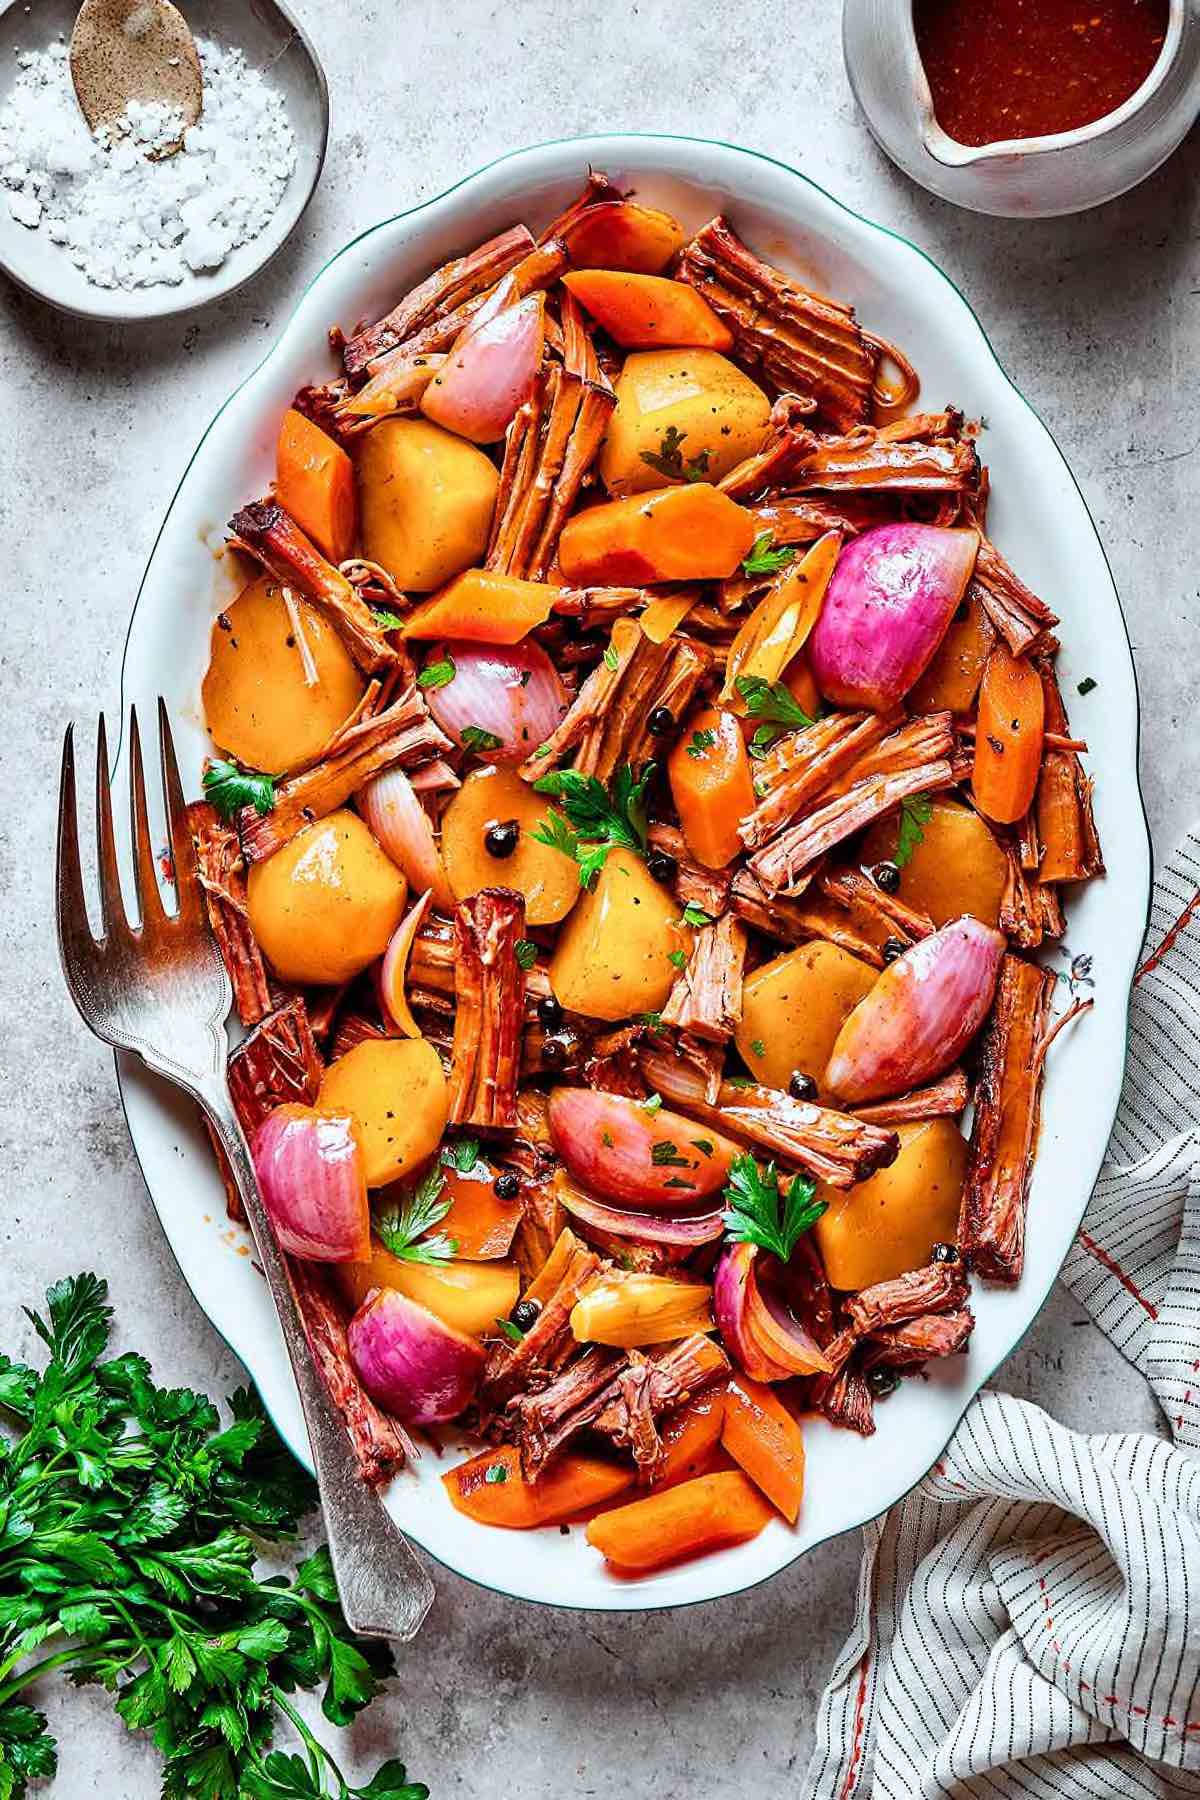 roasted venison with root vegetables.